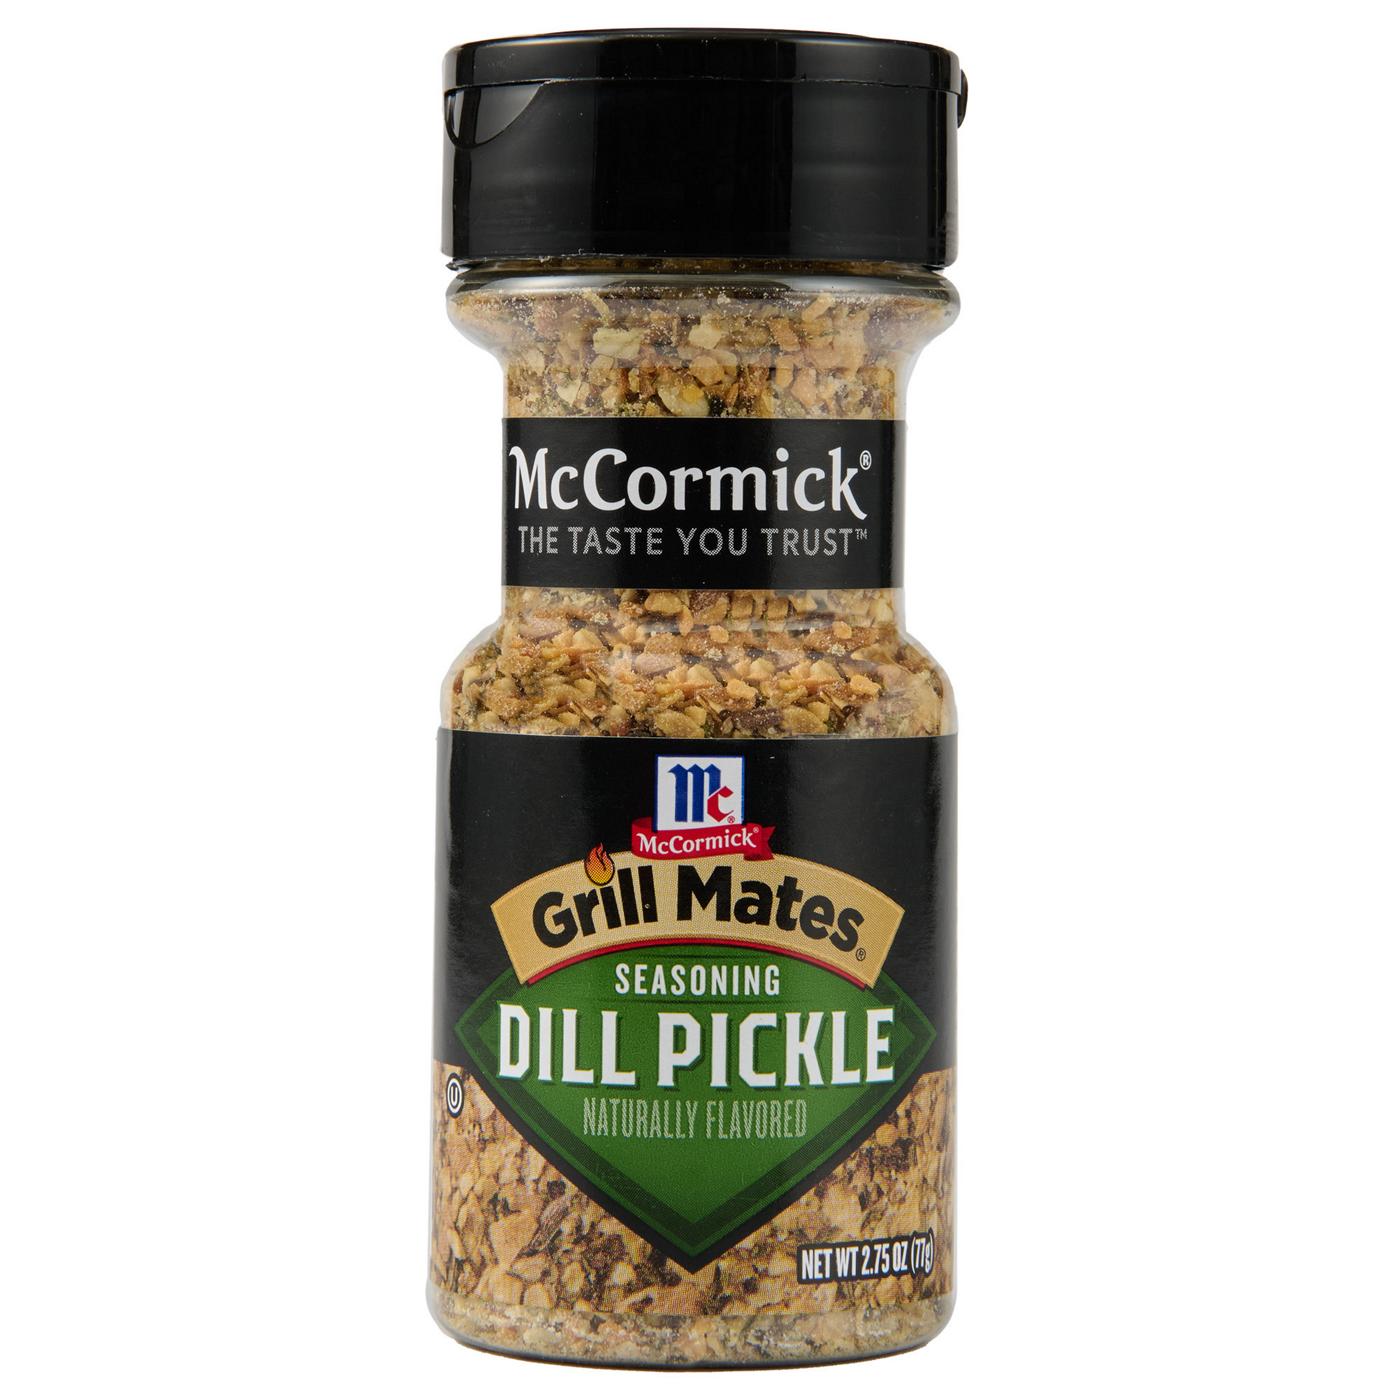 McCormick Grill Mates Dill Pickle Seasoning; image 1 of 4